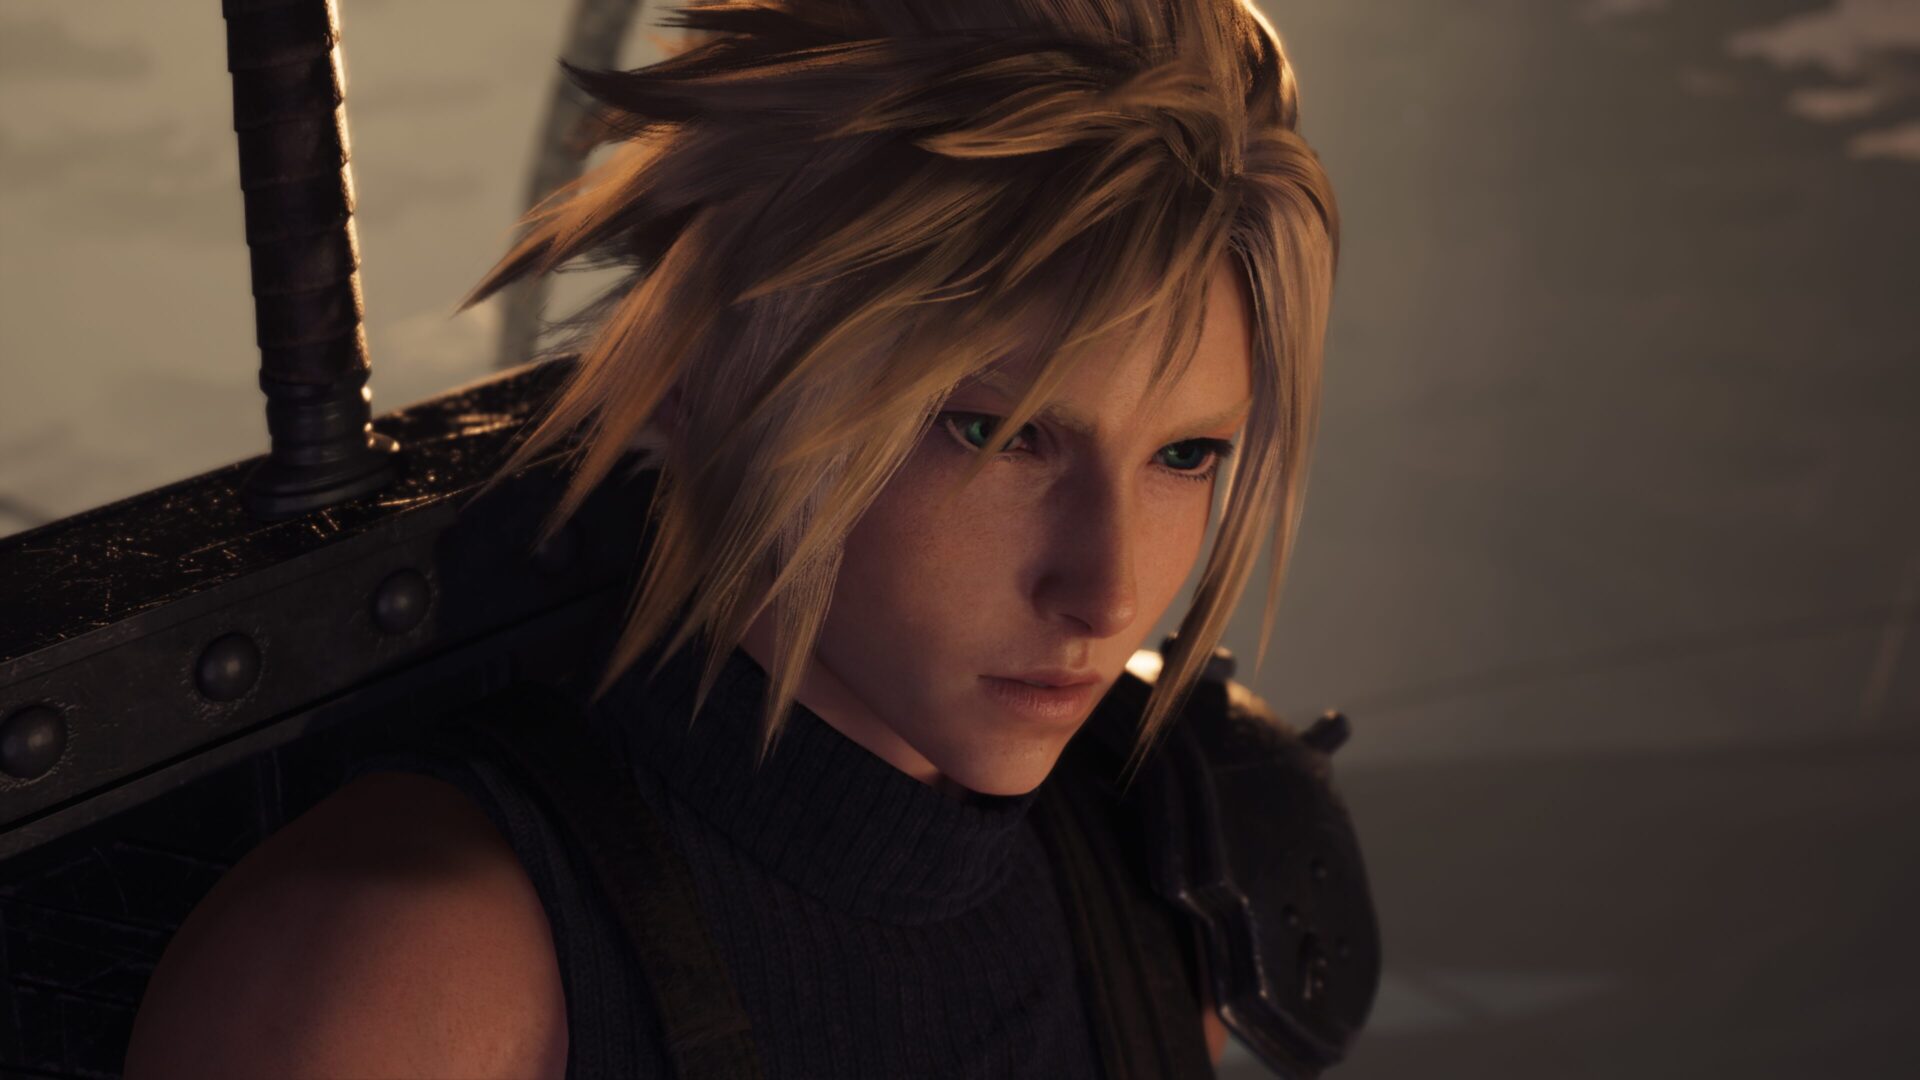 Final Fantasy 7 Rebirth – 15 Things You Shouldn’t Miss Out on Doing